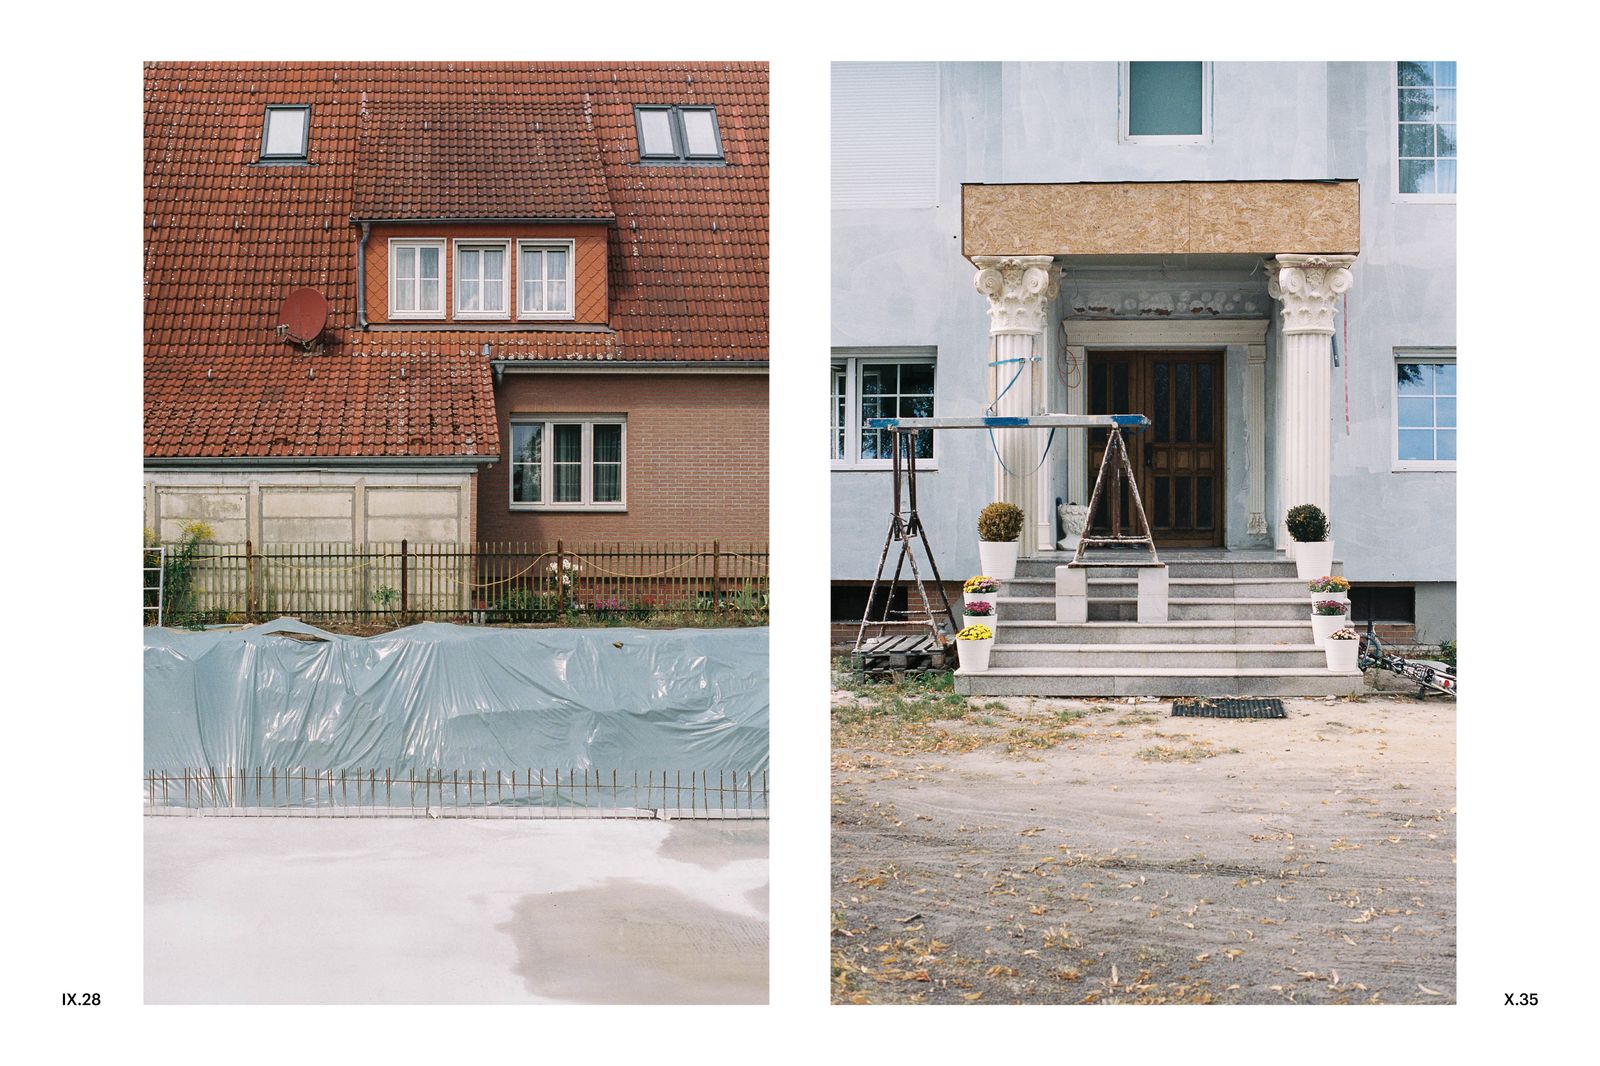 © Antonia Leicht - Image from the IS THIS STILL BERLIN photography project